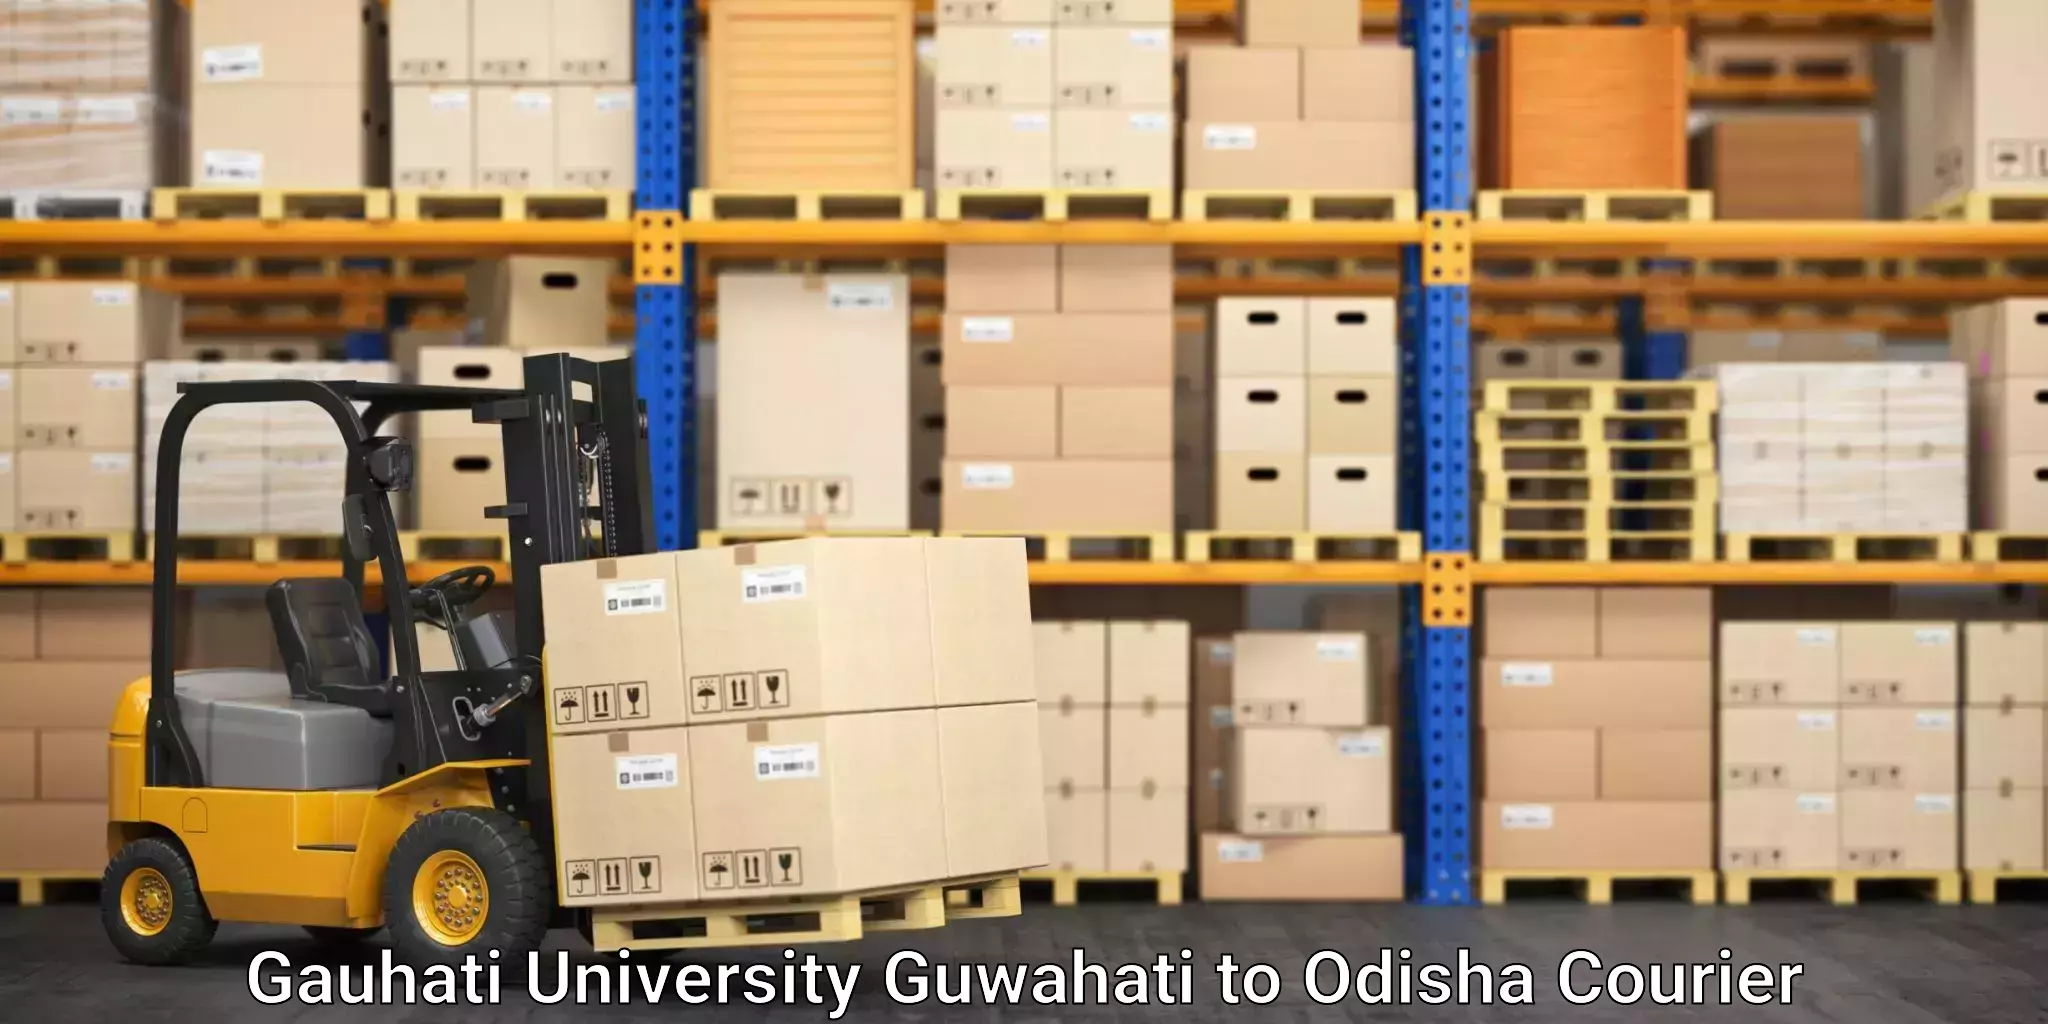 Parcel delivery automation Gauhati University Guwahati to Chandipur